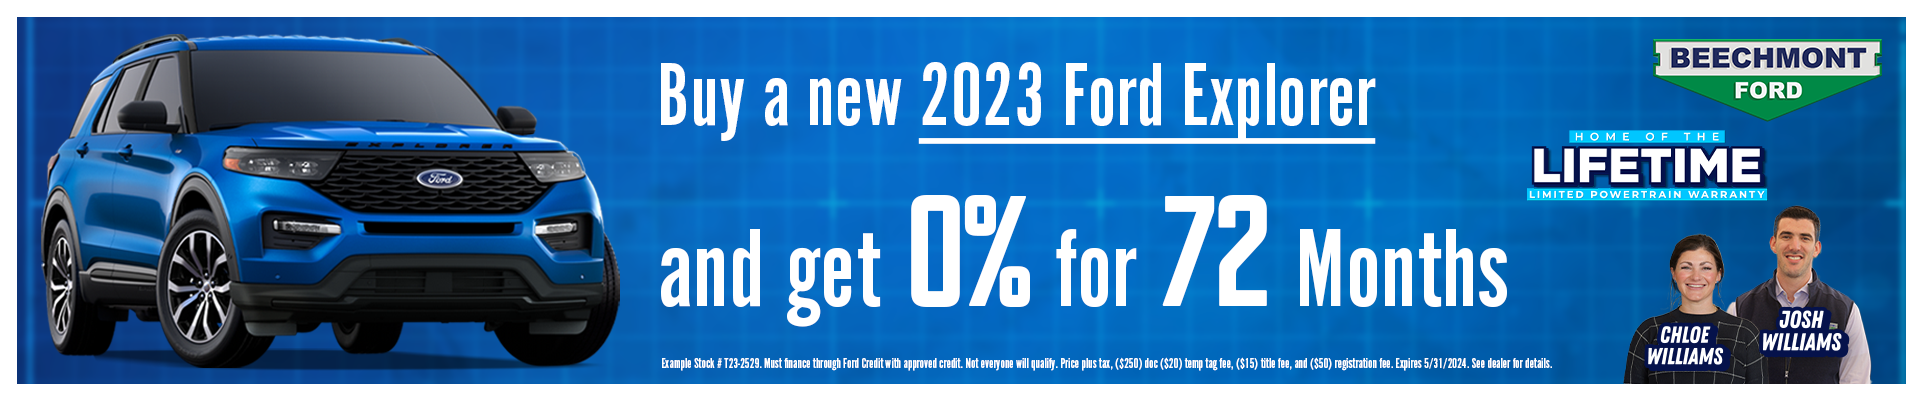 Beechmont Ford Inc | Low Interest Rates